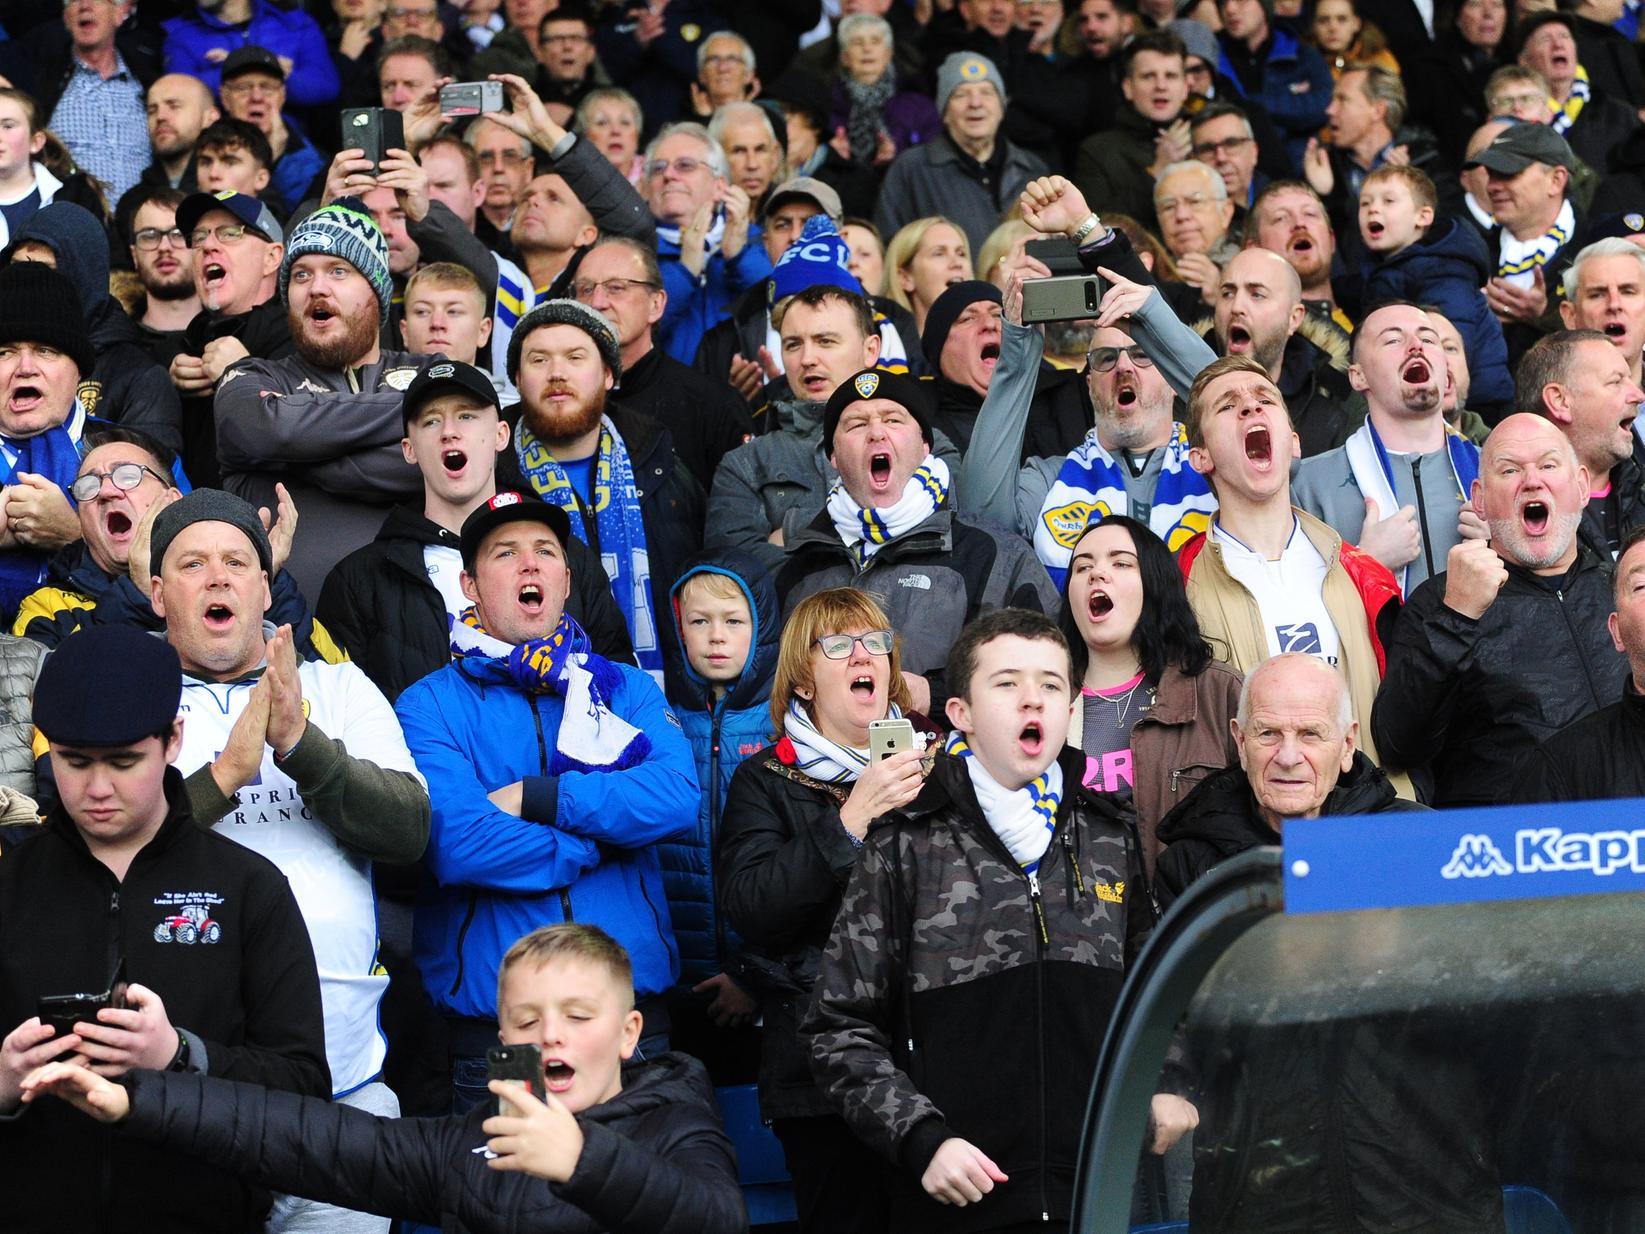 All on song as fans get behind the team during the Leeds v QPR game.